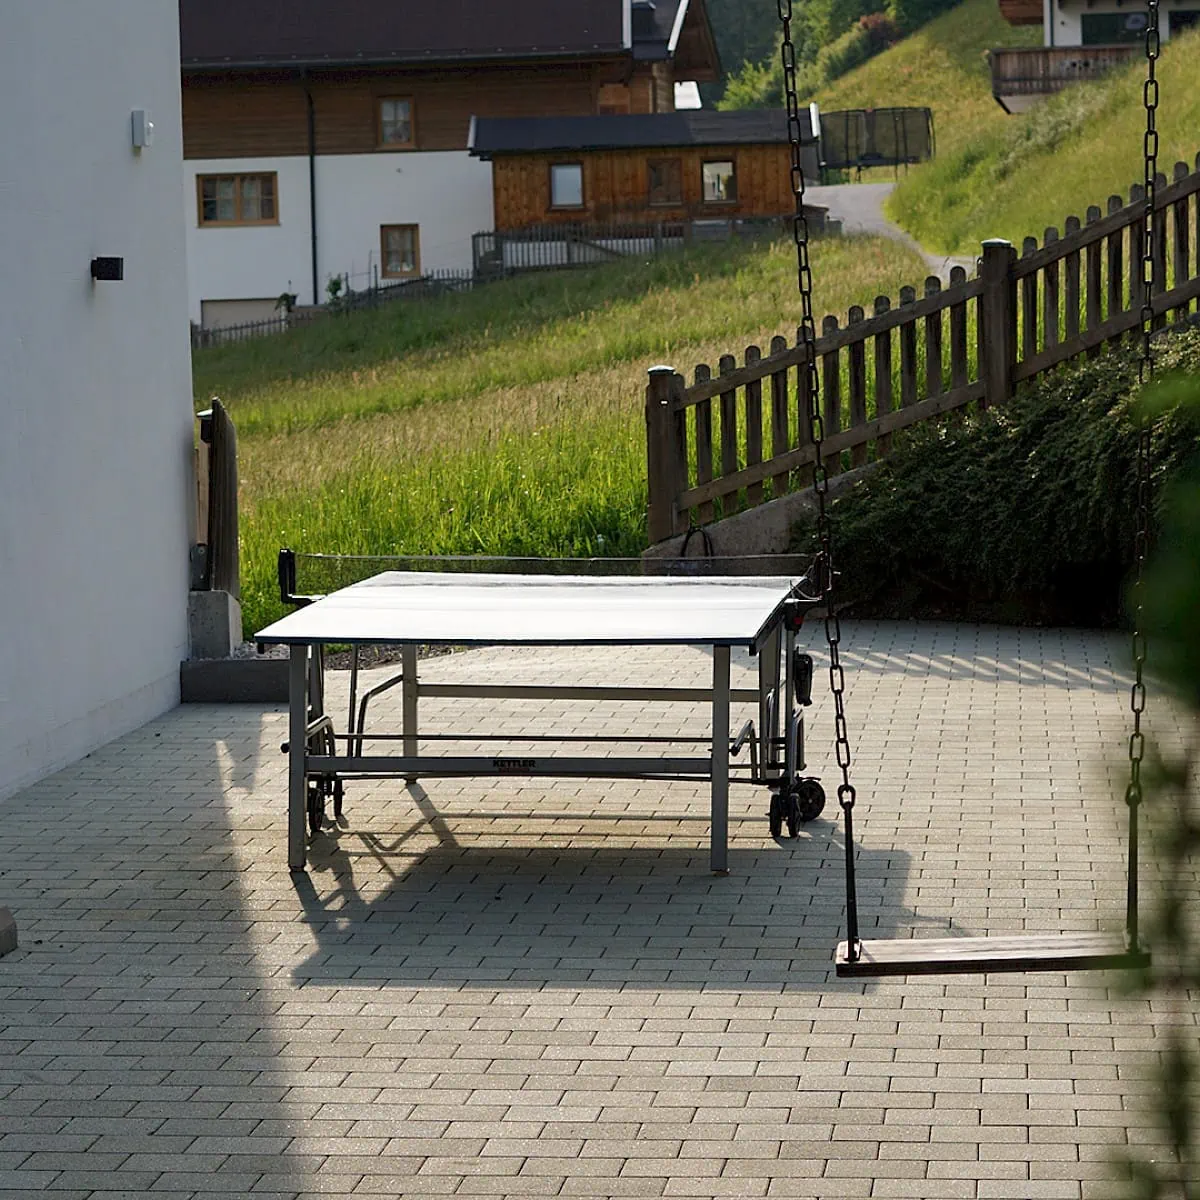 Swing and table tennis table | Zirmhof Apartments